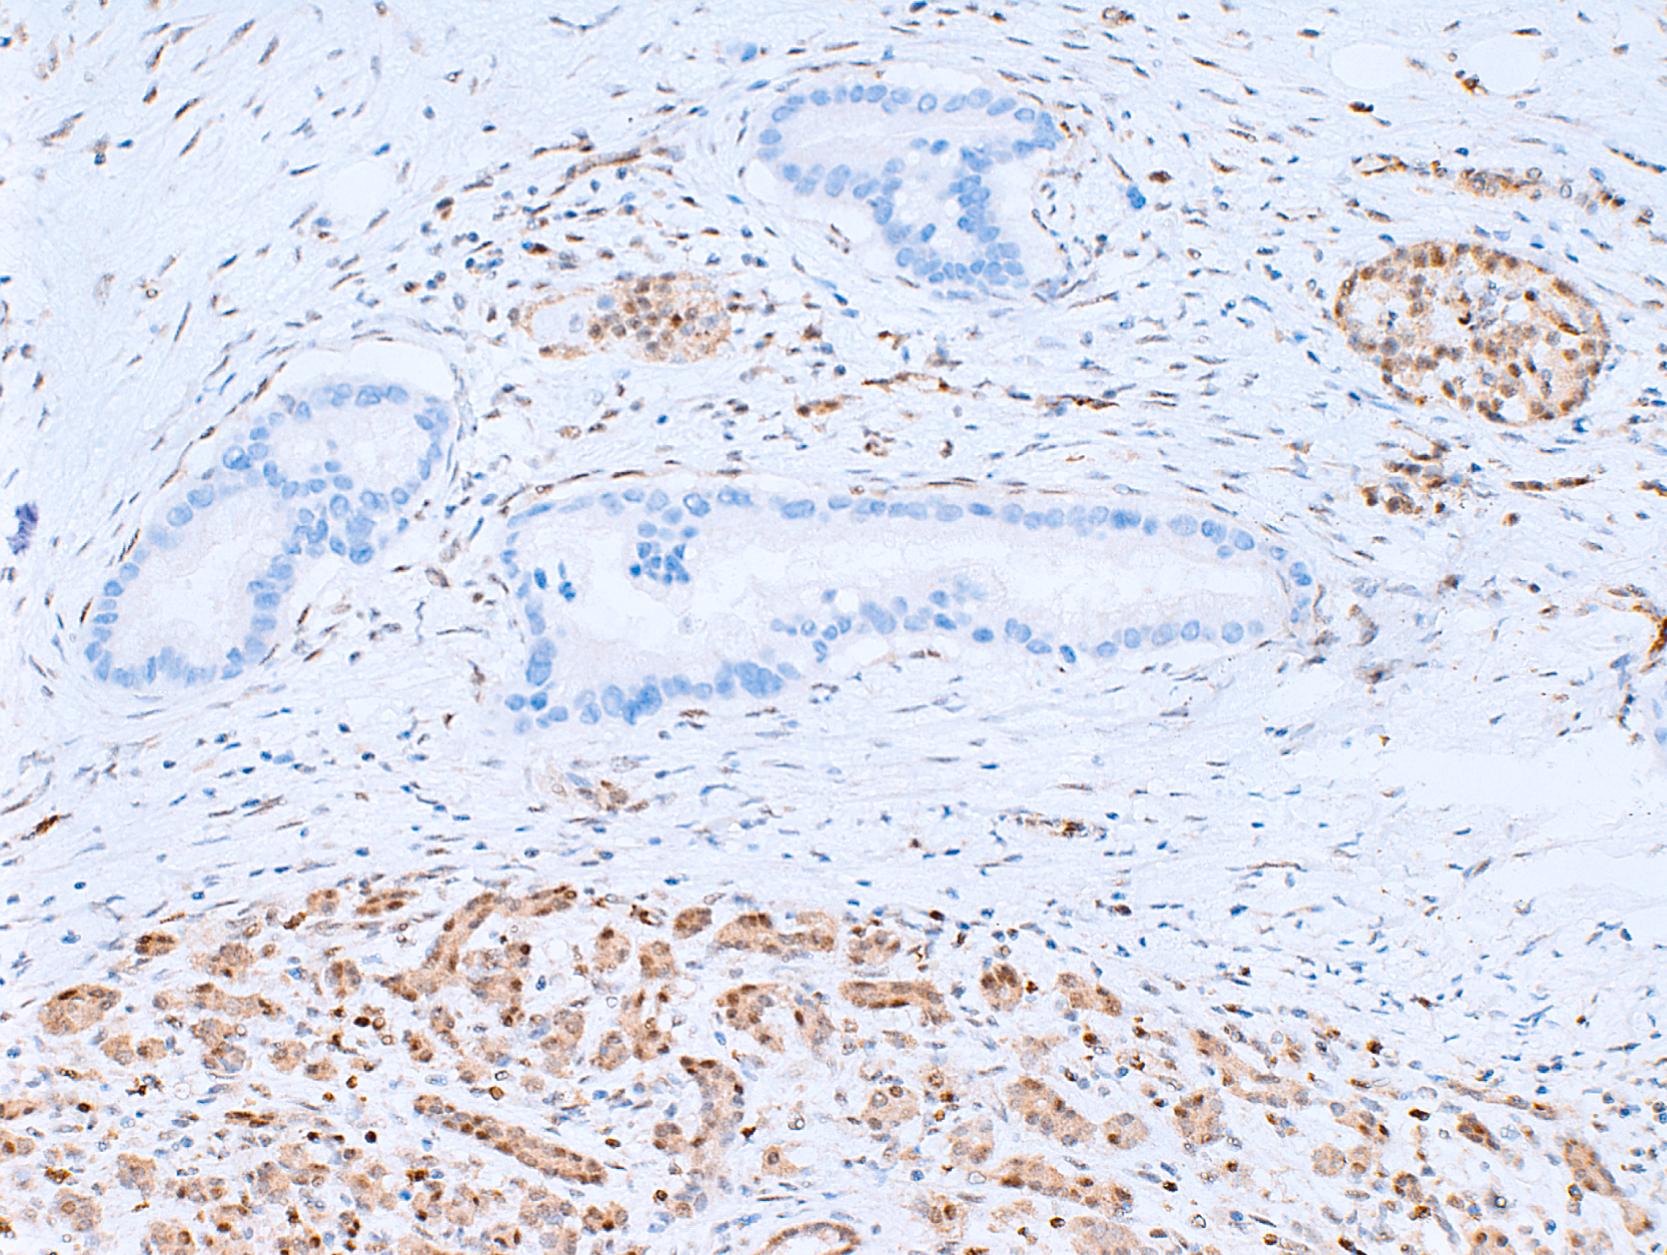 FIGURE 35.2, Smad4 immunohistochemistry in pancreatic ductal adenocarcinoma. Immunohistochemical labeling for Smad4 protein shows loss of expression in the neoplastic glands of pancreatic ductal adenocarcinoma, while the associated nonneoplastic stroma retains normal nuclear labeling.